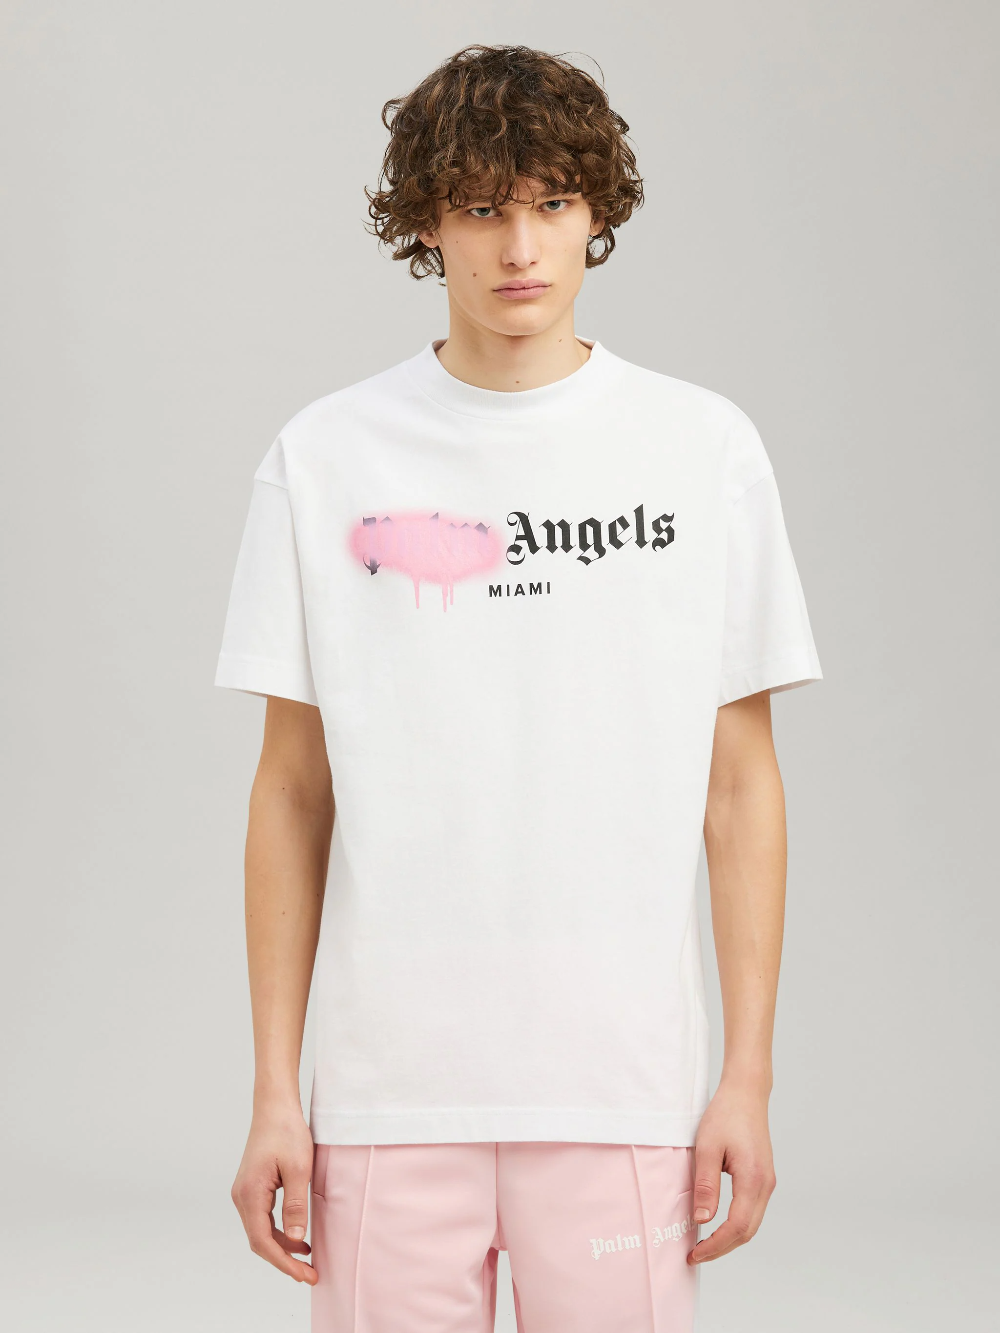 Palm Angels Miami Sprayed Logo Tee White | Hype Vault Kuala Lumpur | Asia's Top Trusted High-End Sneakers and Streetwear Store